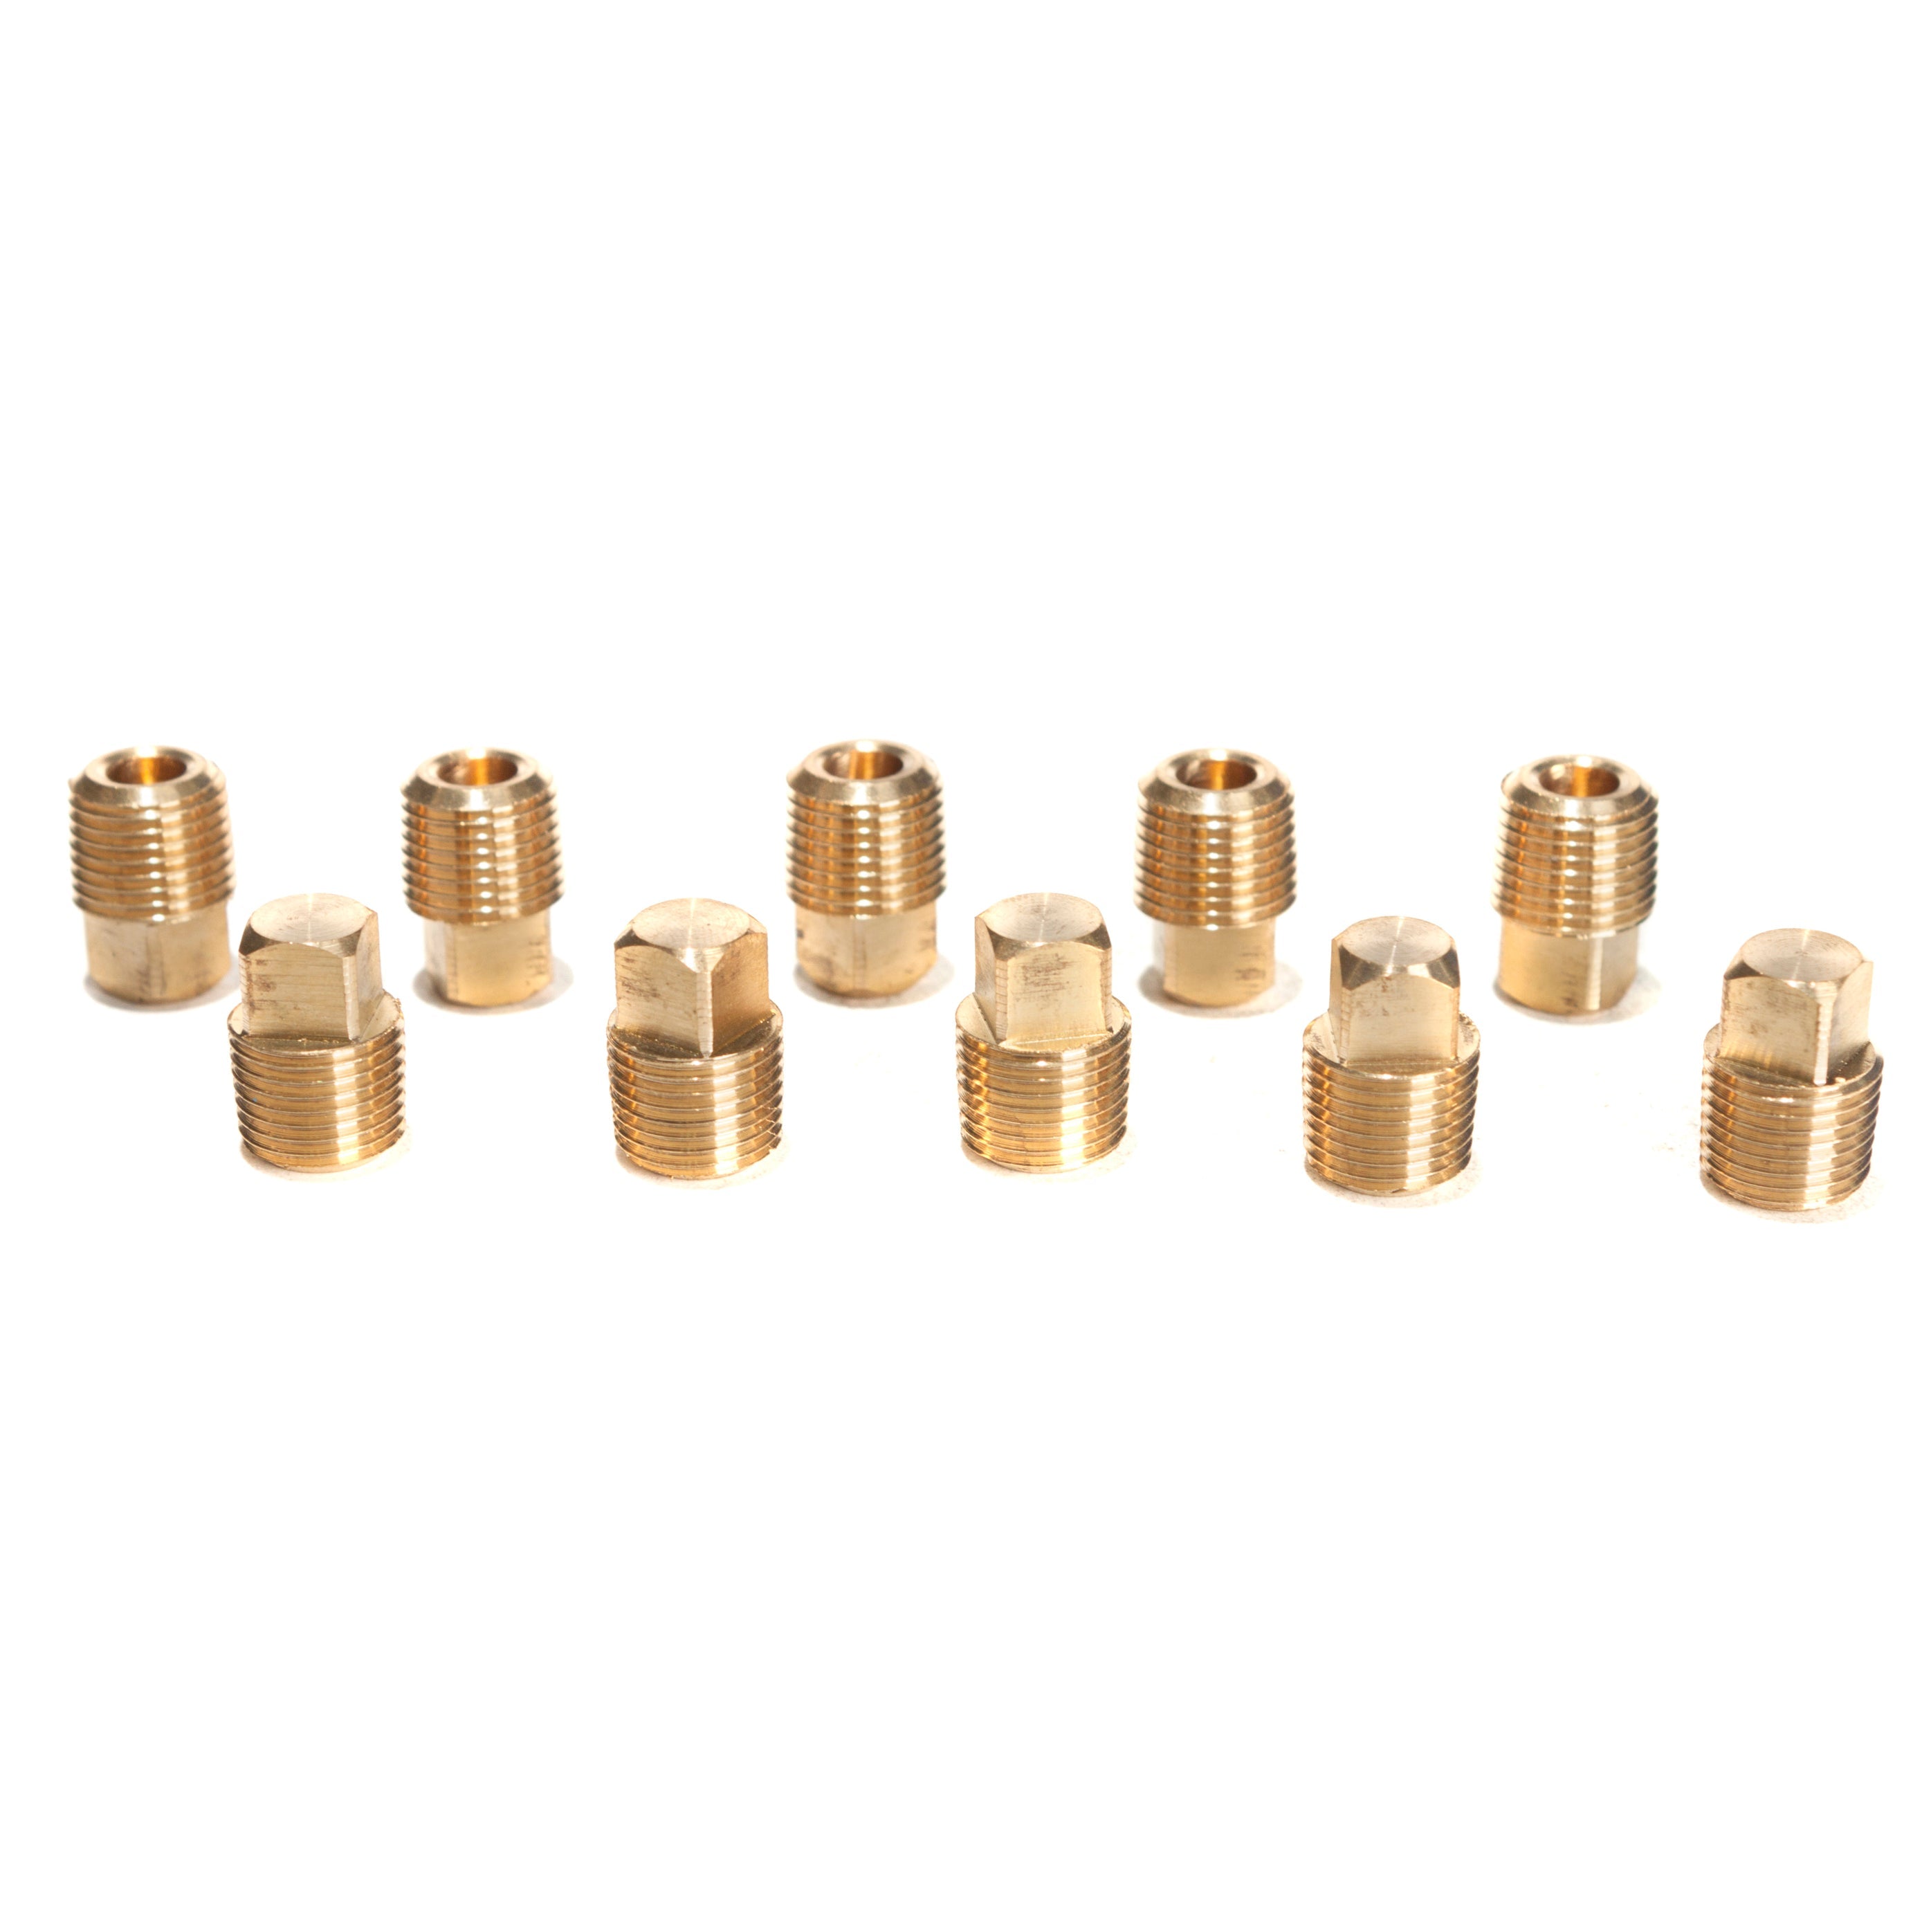 LTWFITTING Brass Pipe Square Head Plug Fittings 1/8 Inch Male NPT Air Fuel Water Boat(Pack of 10)